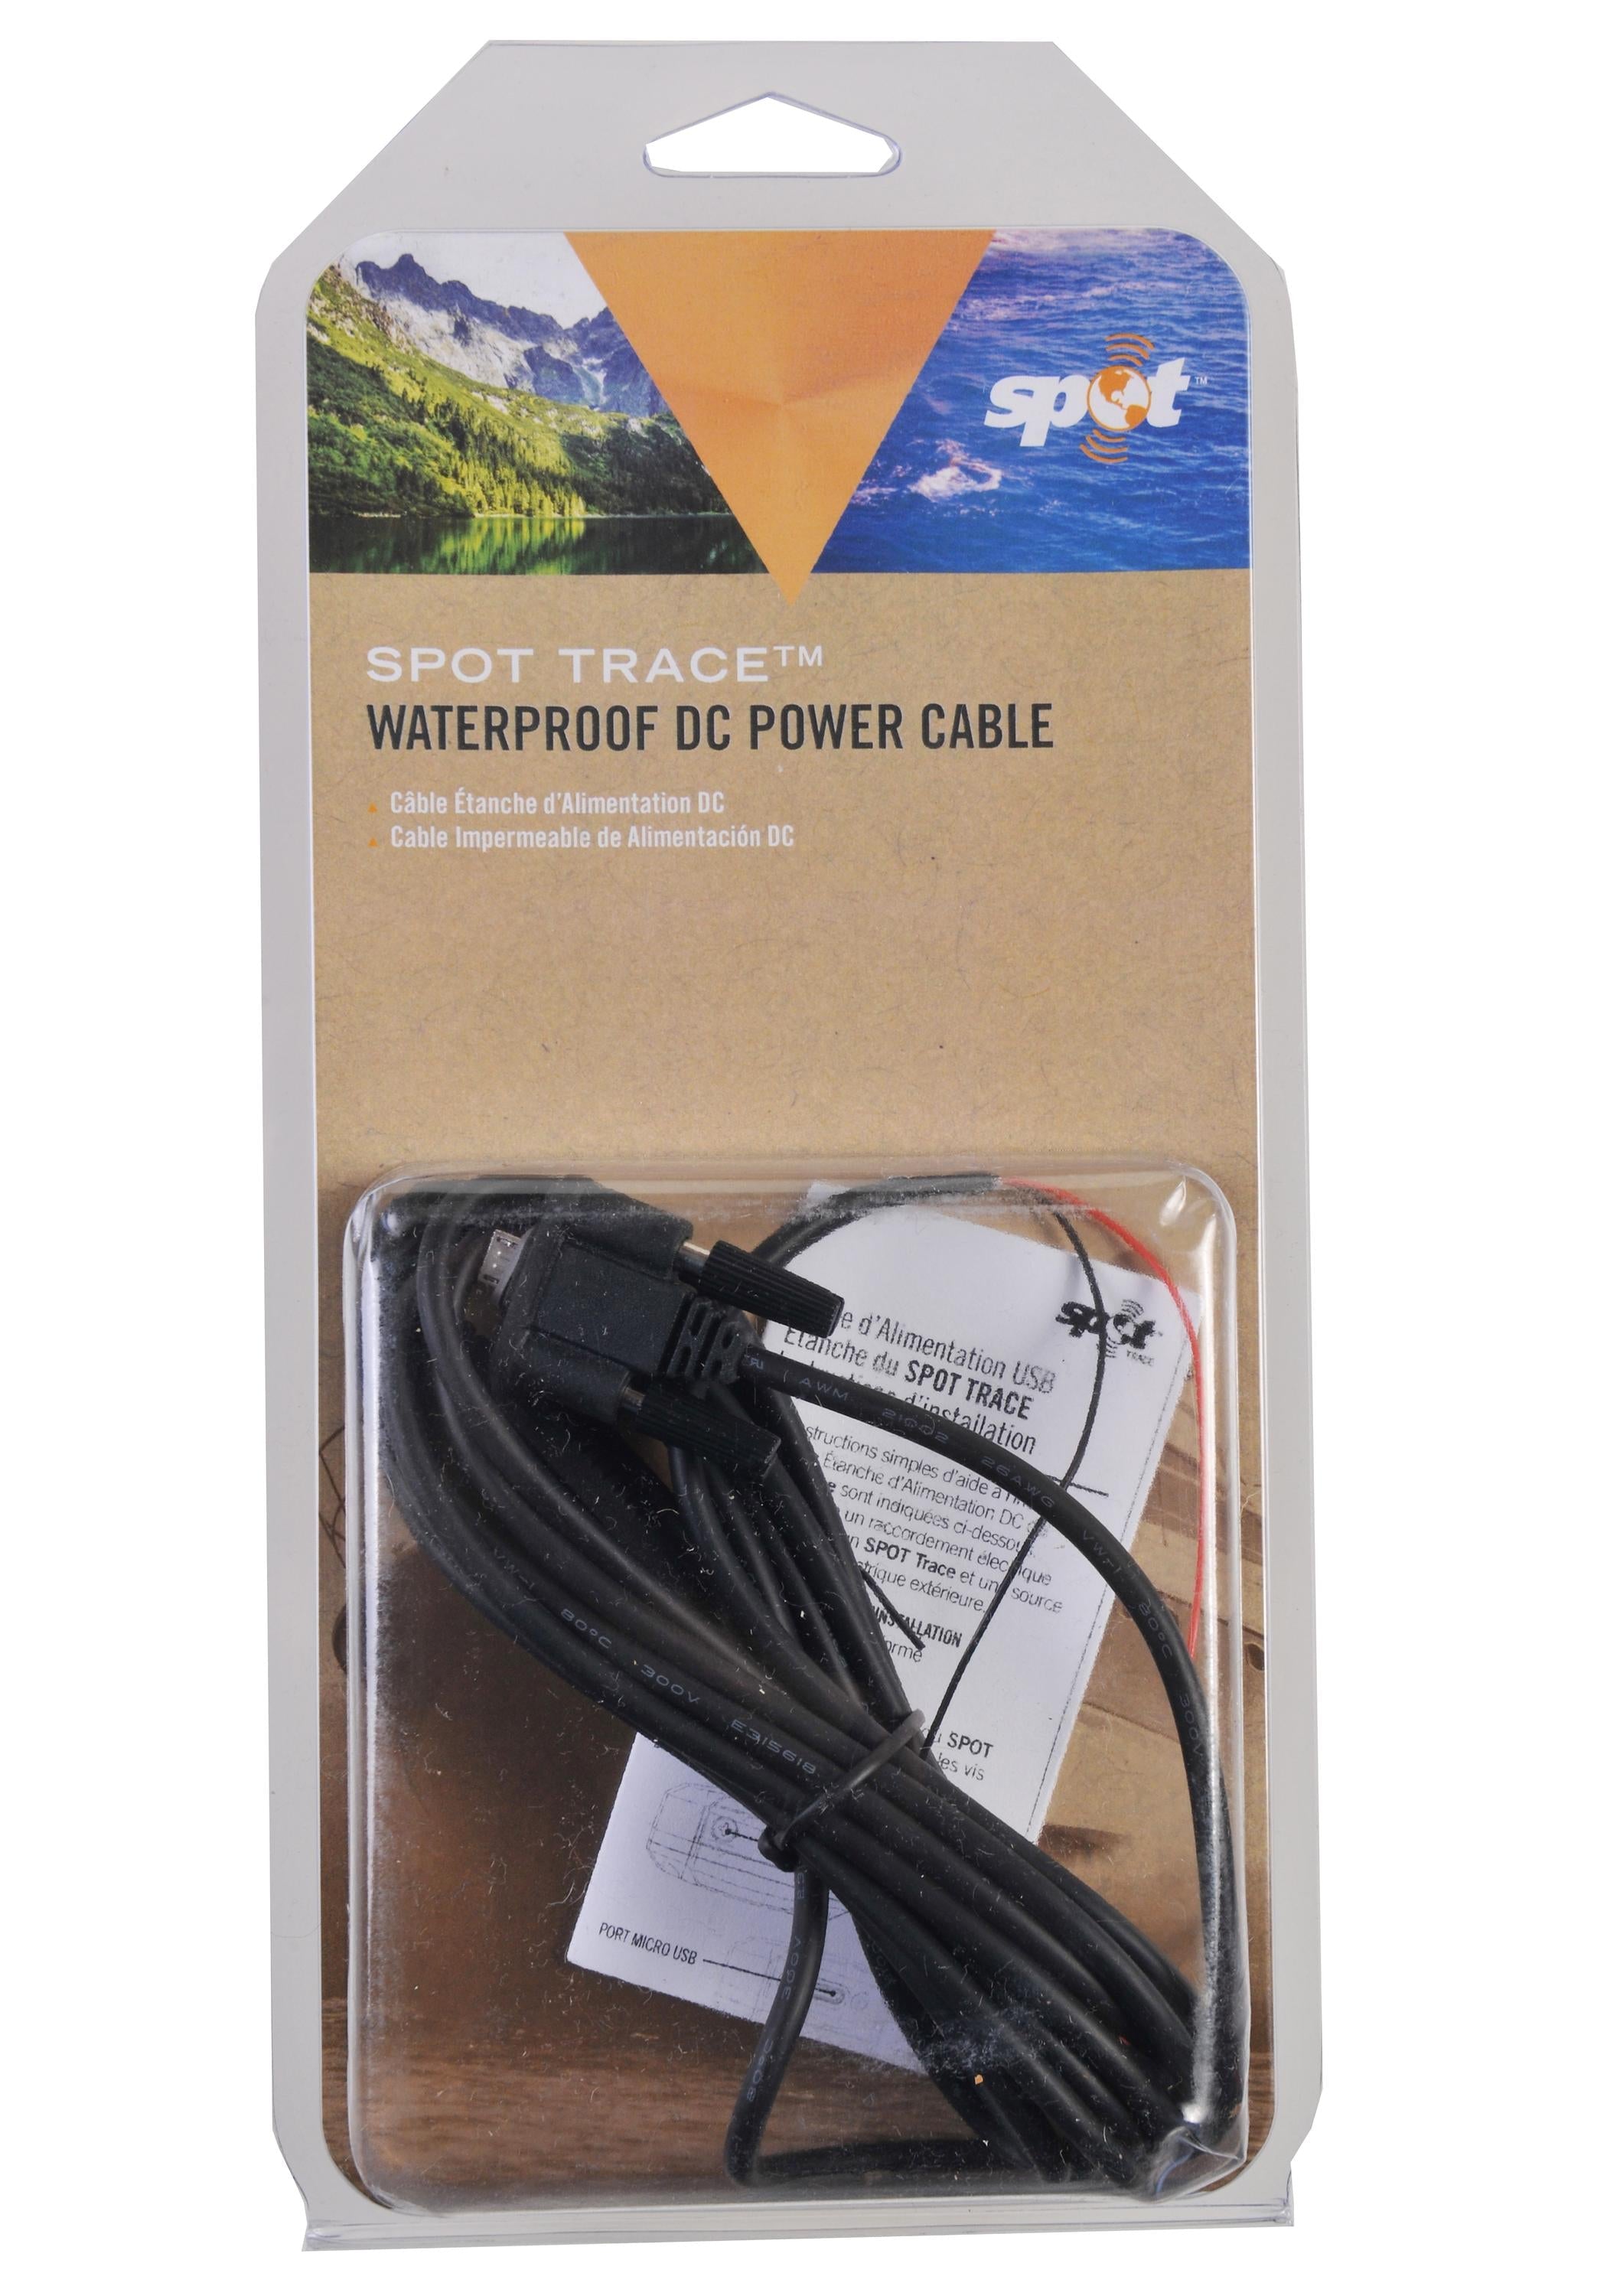 Waterproof USB Cable for SPOT Trace Satellite Asset Tracker